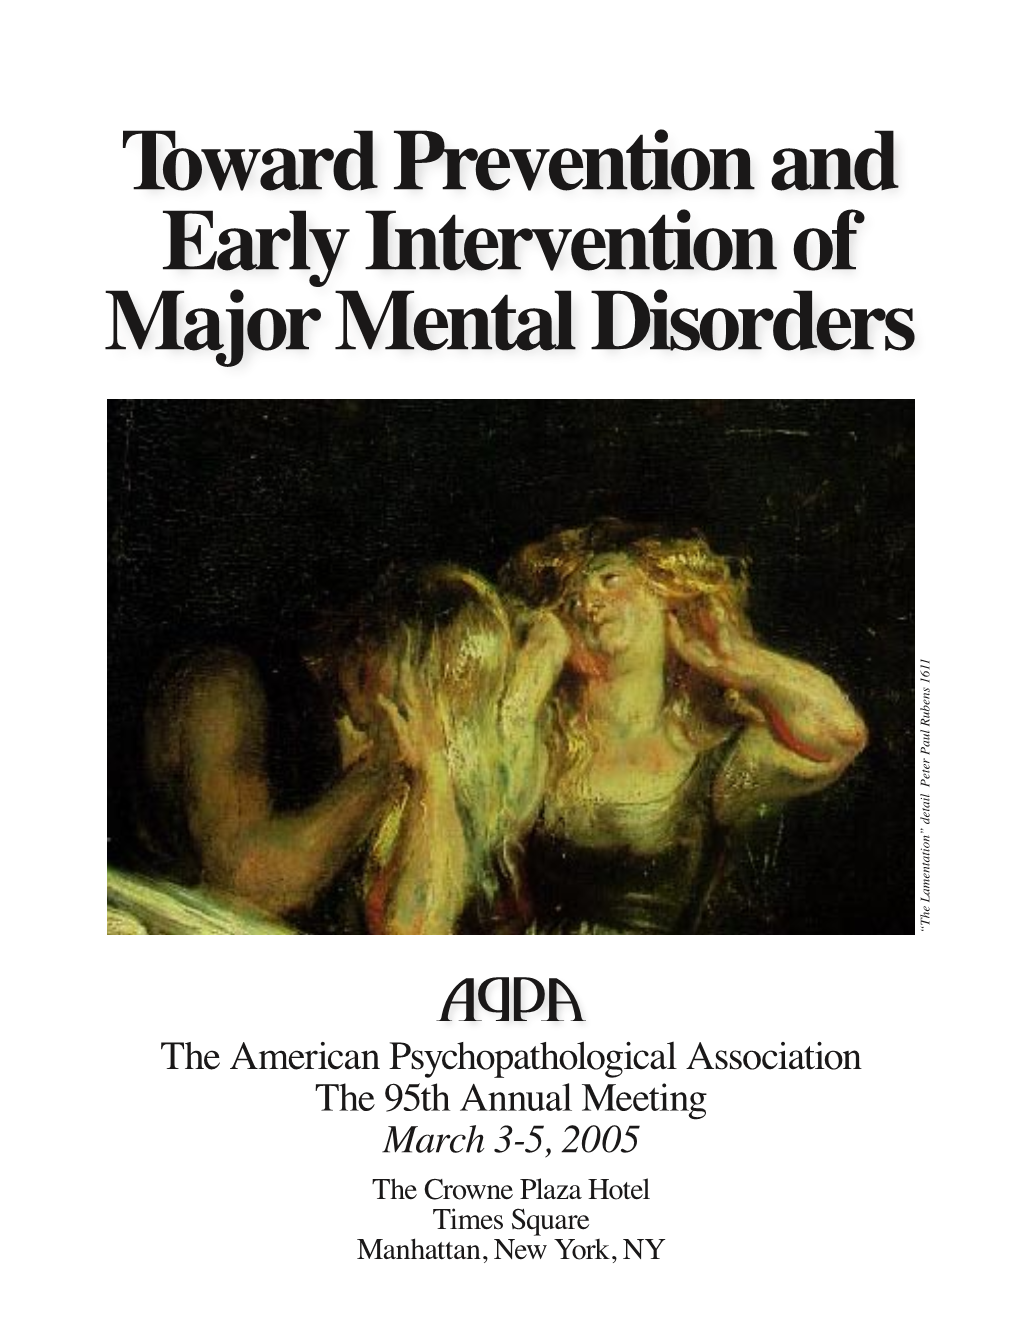 Toward Prevention and Early Intervention of Major Mental Disorders